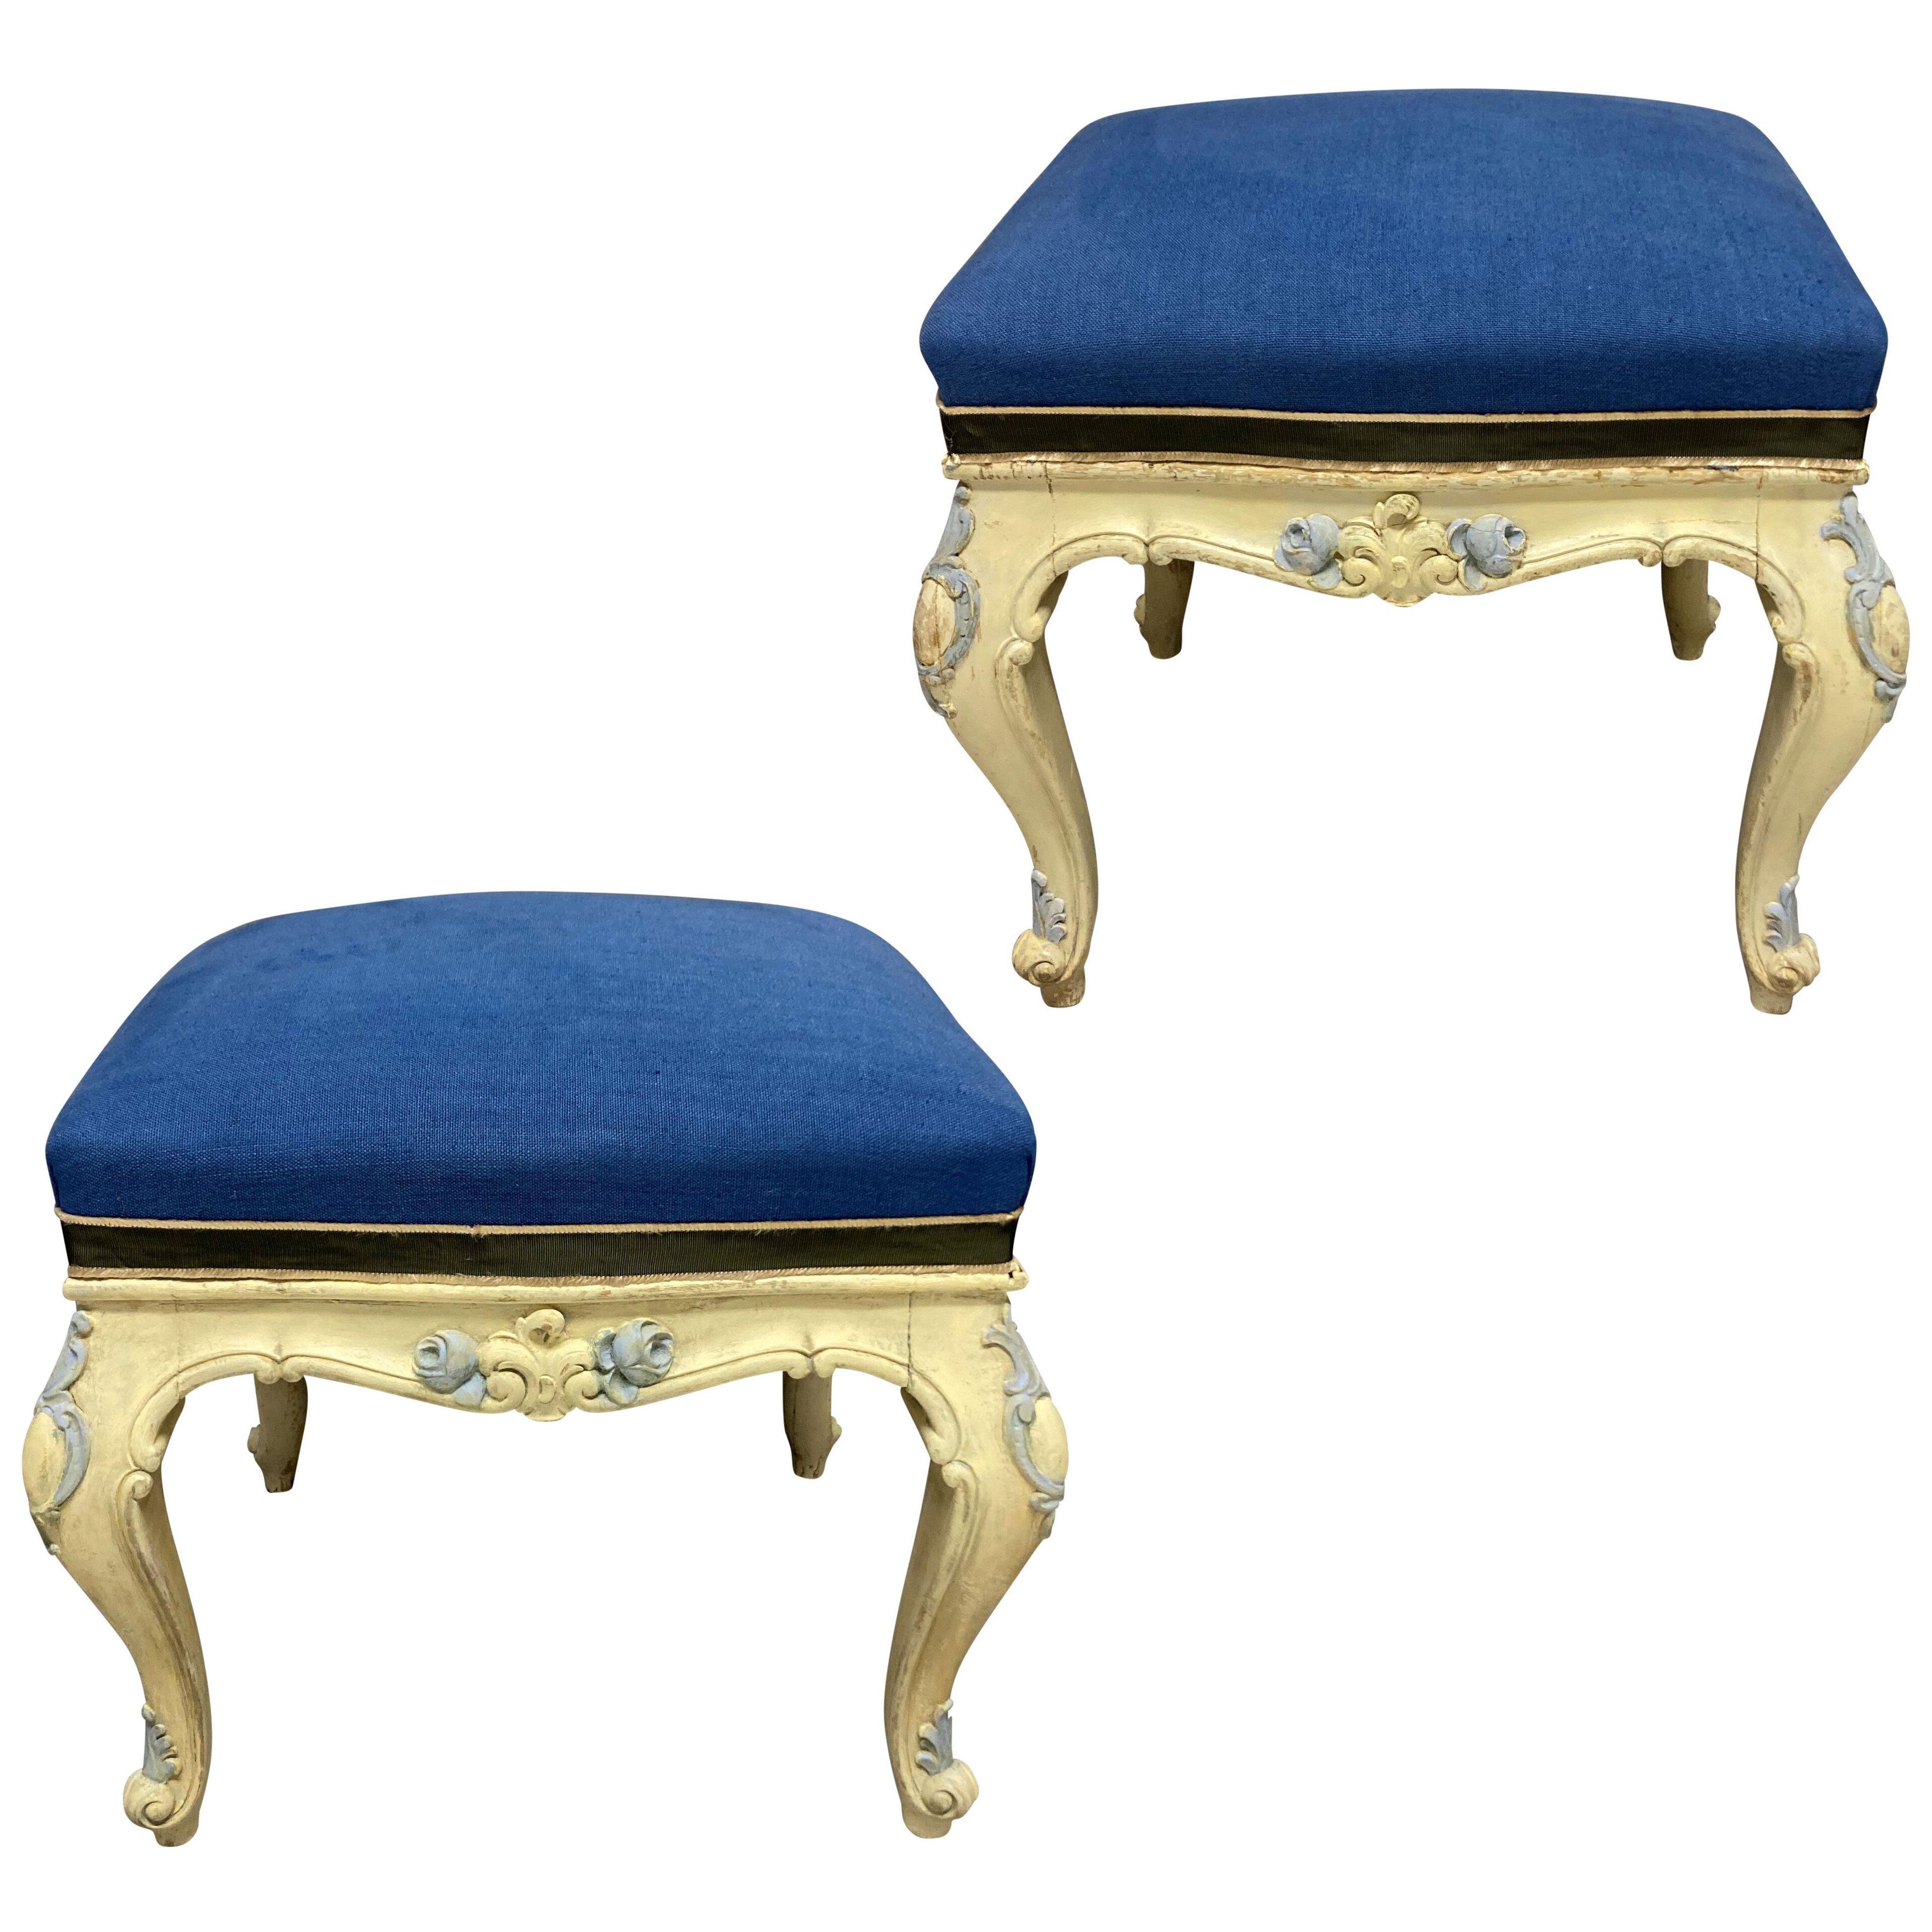 A PAIR OF PAINTED LOUIS XV STYLE STOOLS